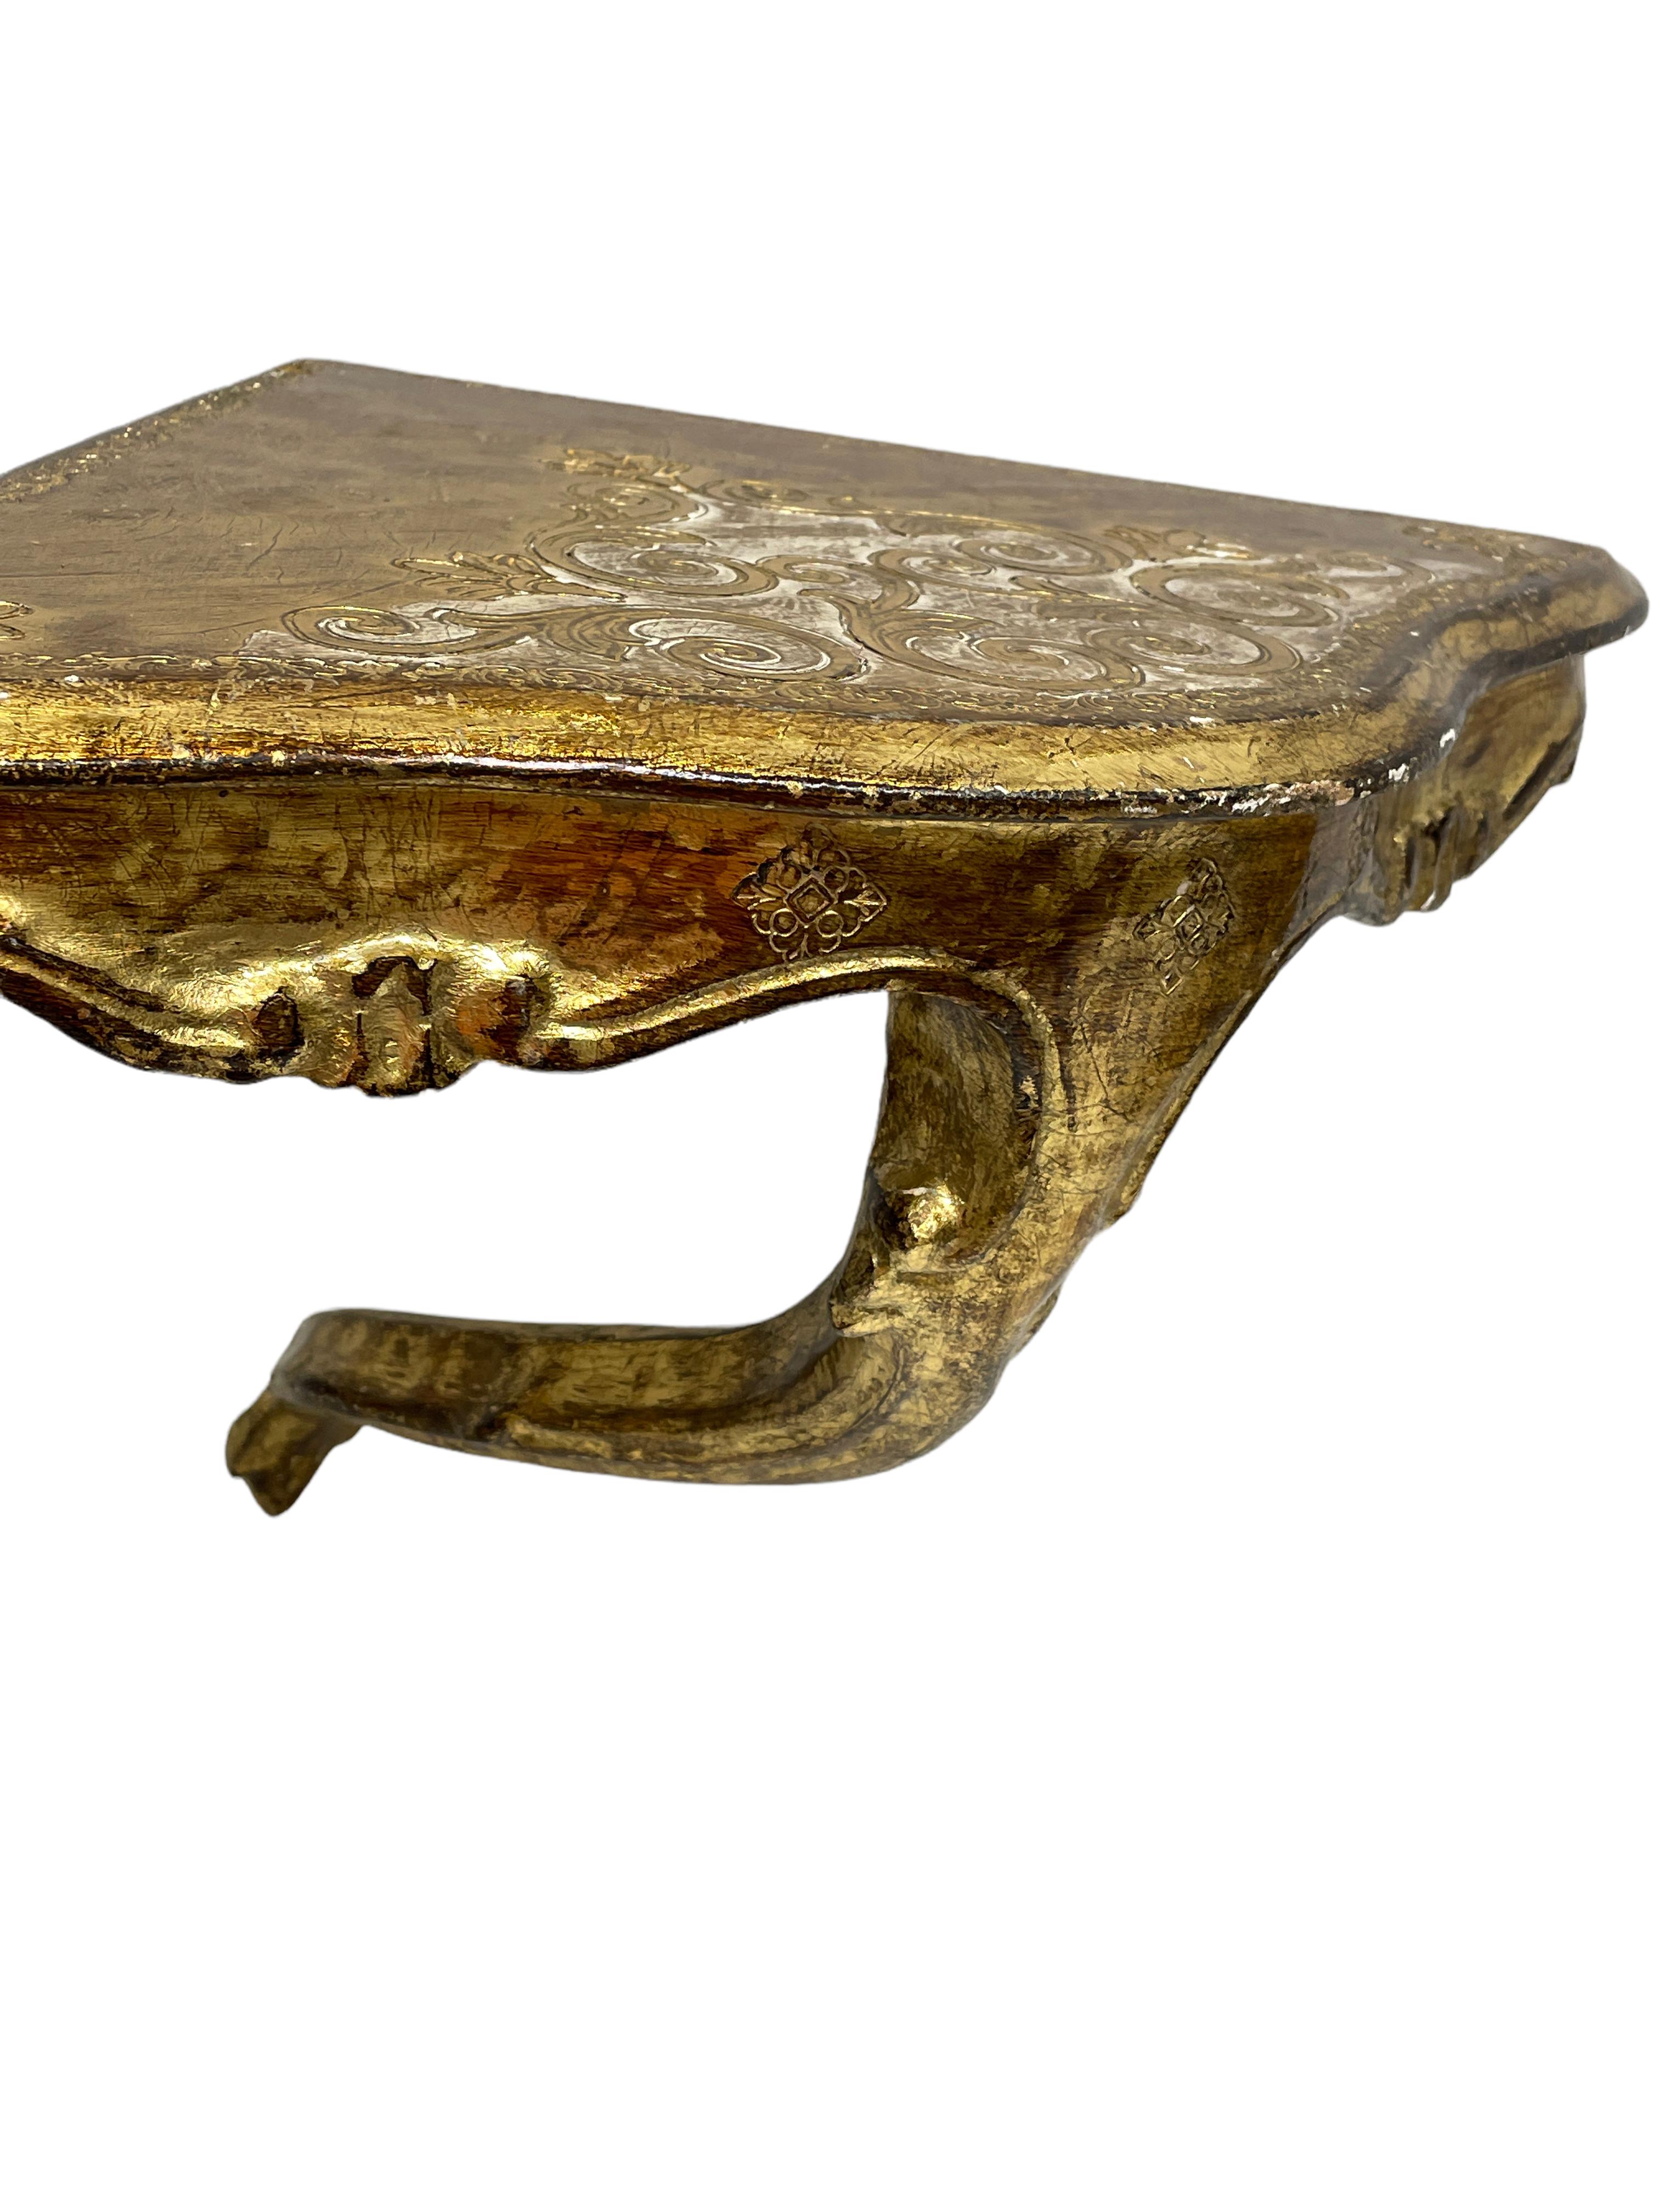 Italian Vintage Florence Wall Corner Shelf Console, Gilded Carved Wood, Florentine Style For Sale